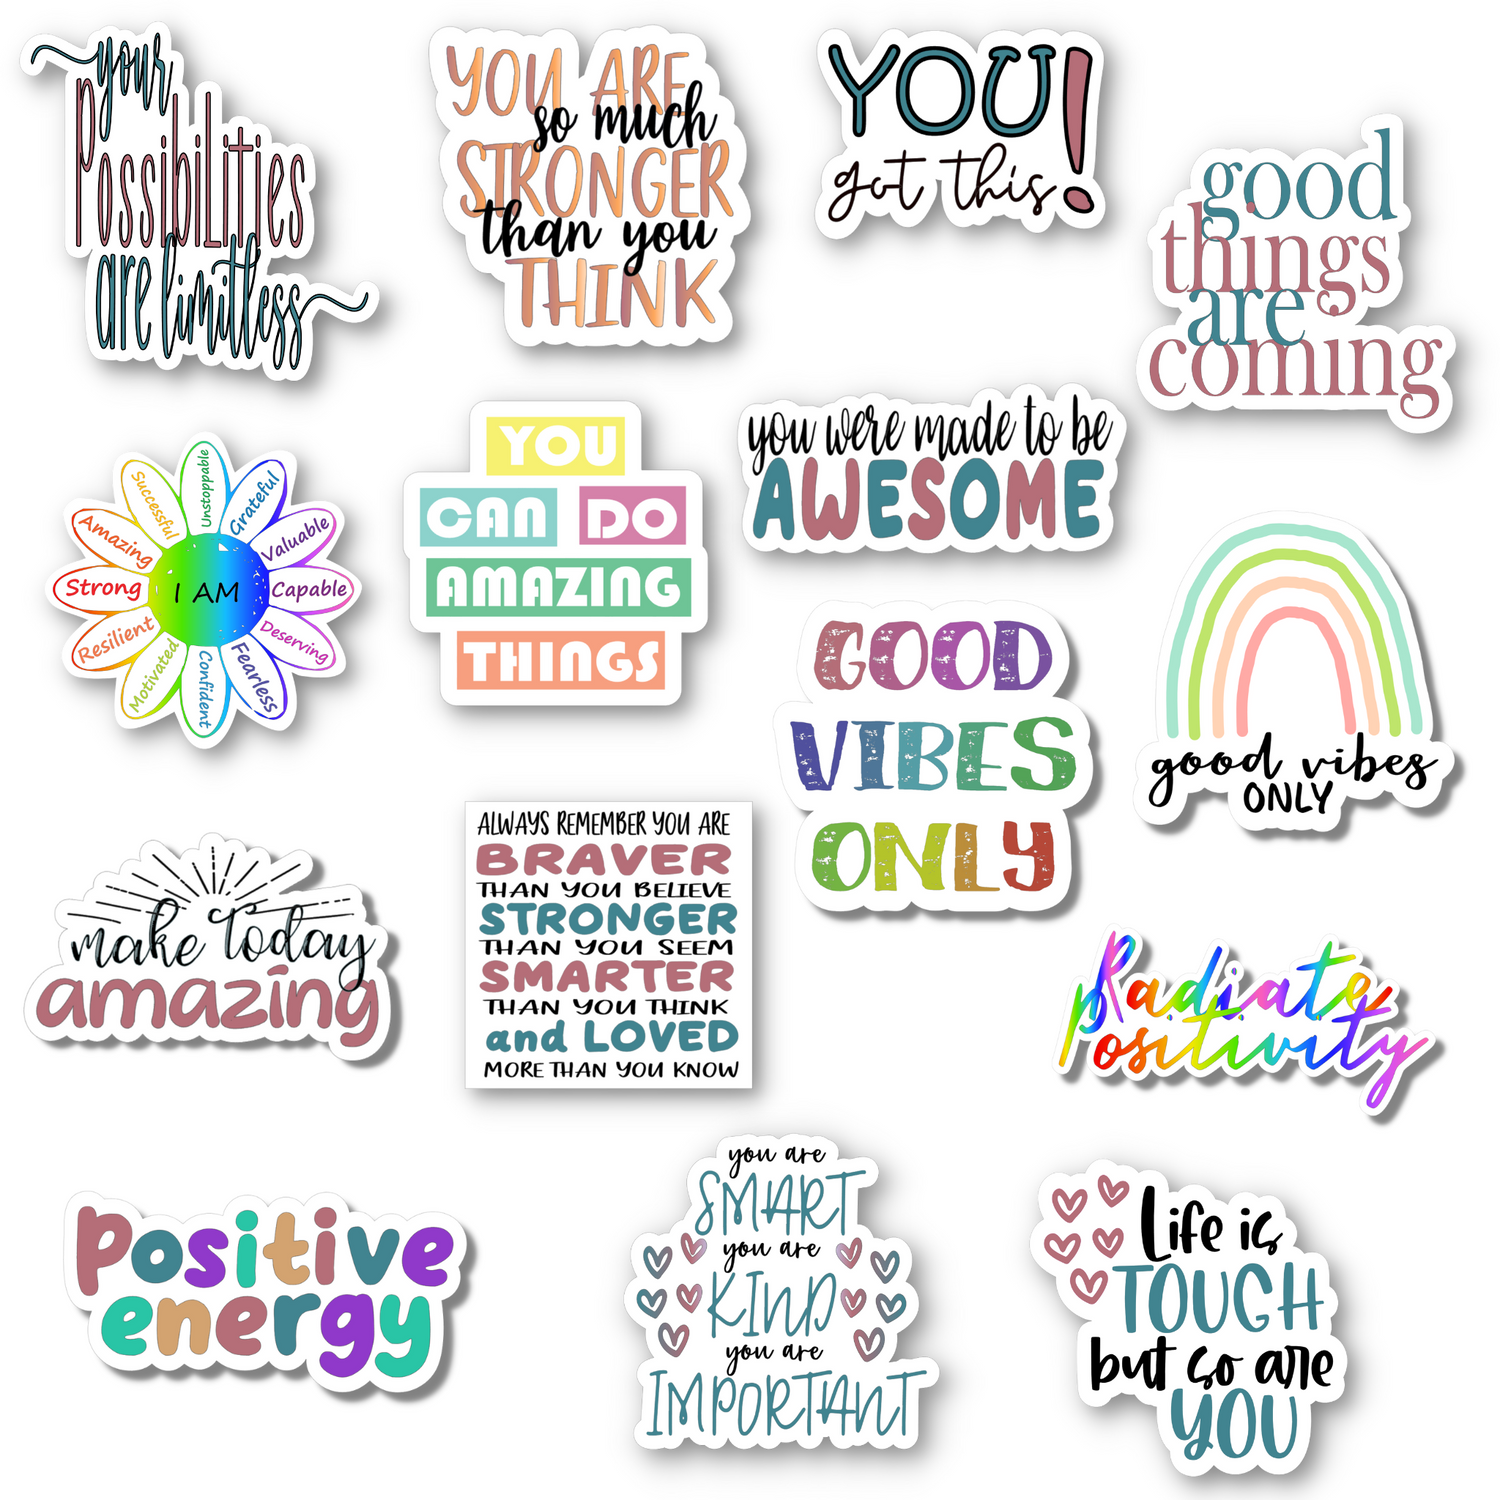 You Got This Positive Affirmation Sticker